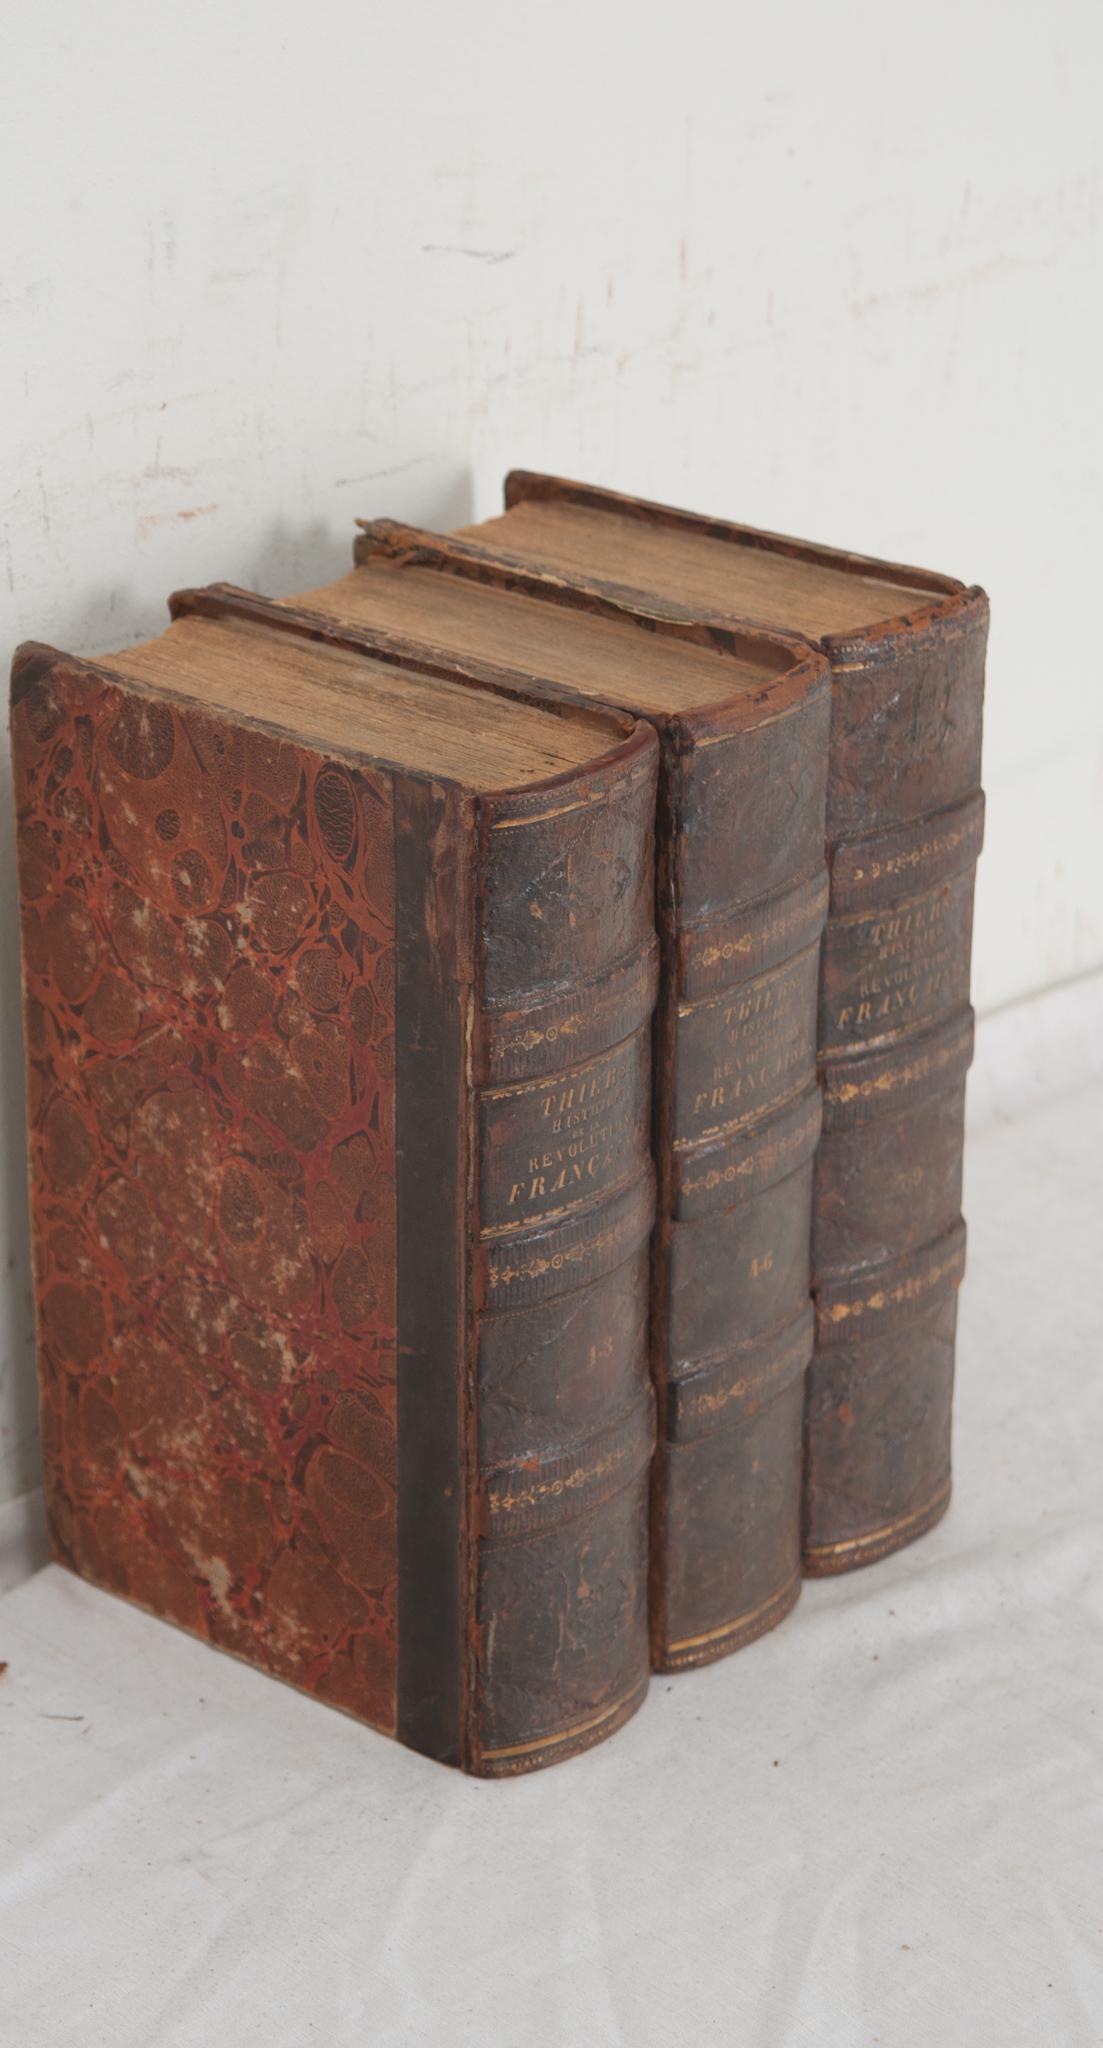 Hand-Crafted Set of 3 Leather Bound French Revolution Books